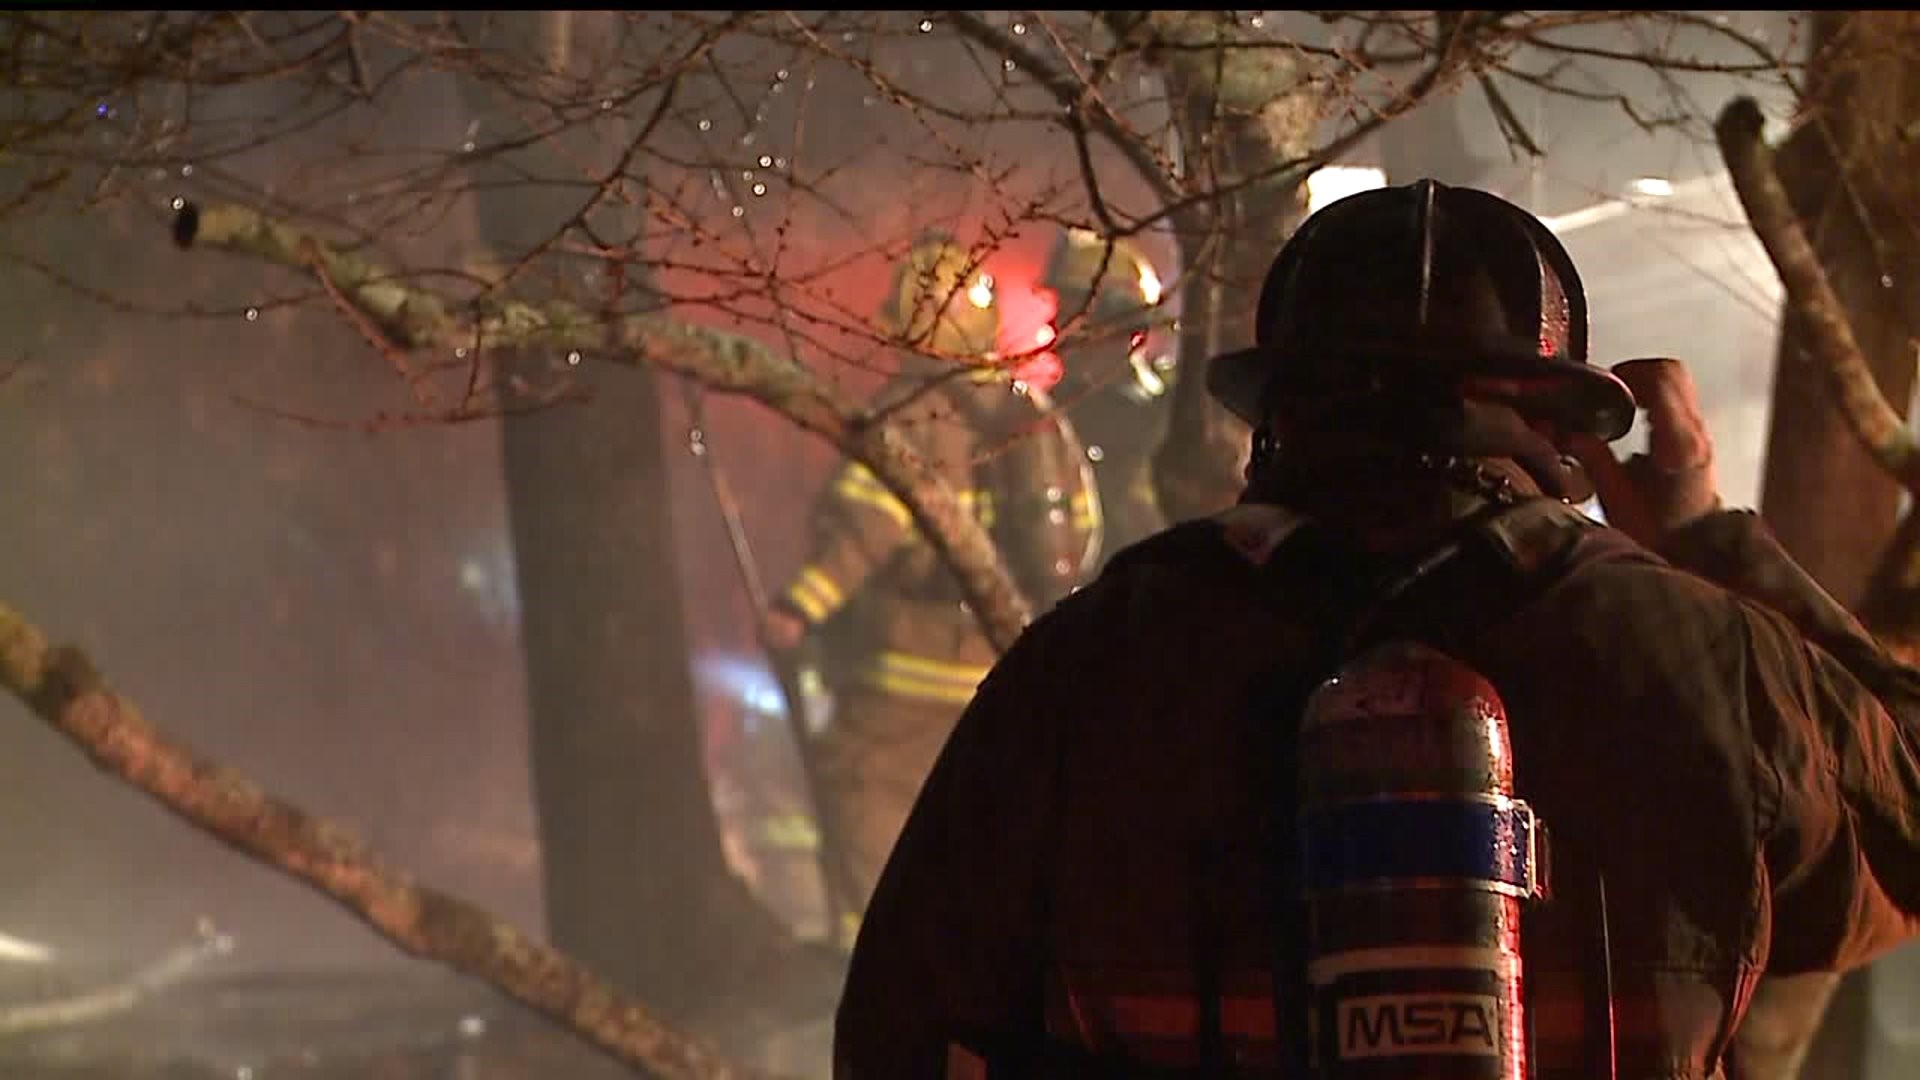 CDC: Firefighters face increased risk of cancer